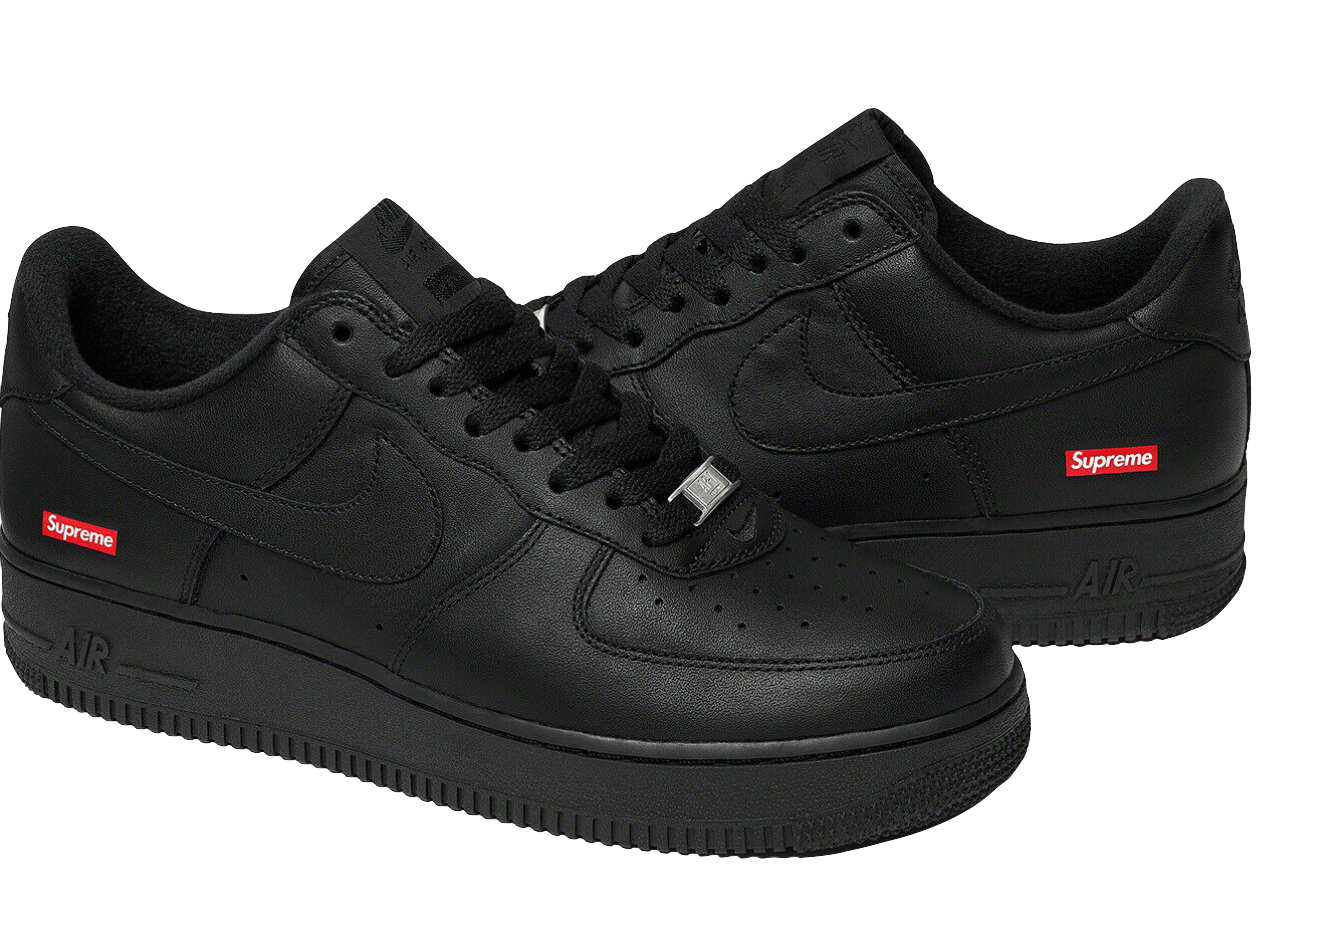 Best Shoe Deals: How to Buy the Supreme x Nike Air Force 1 Low Black